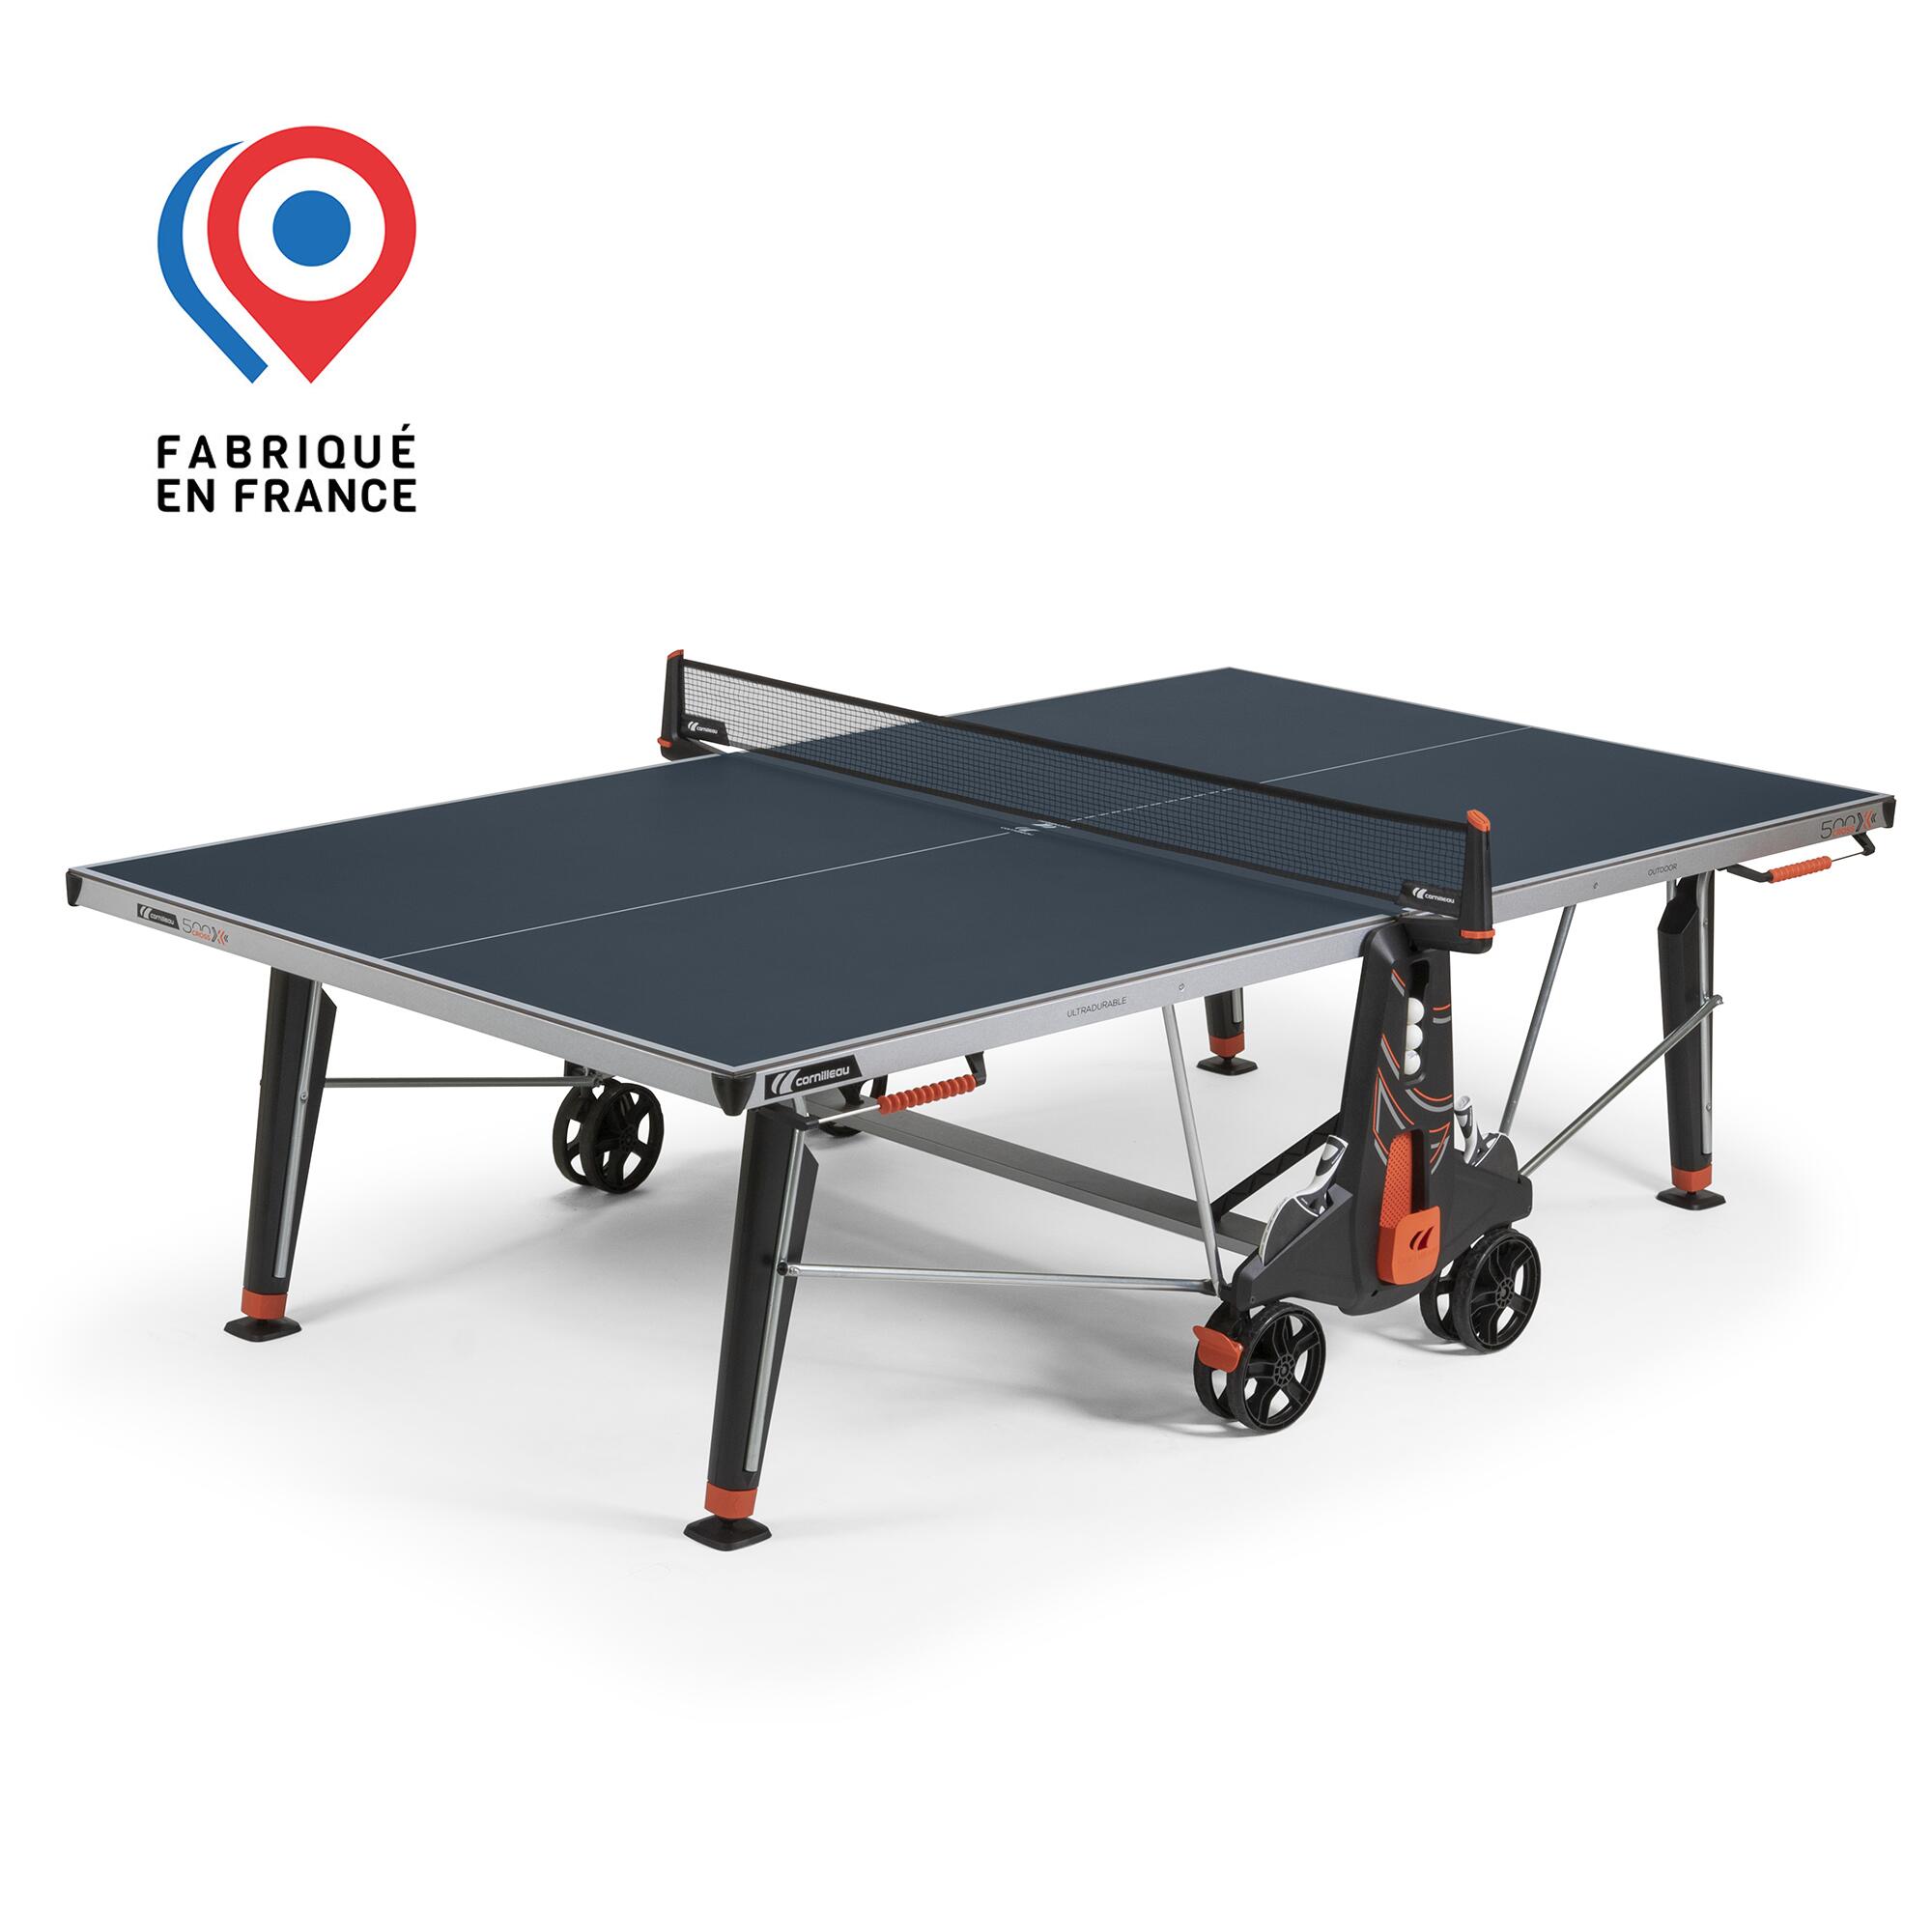 500X Performance Outdoor Table Tennis Table - Blue 1/8